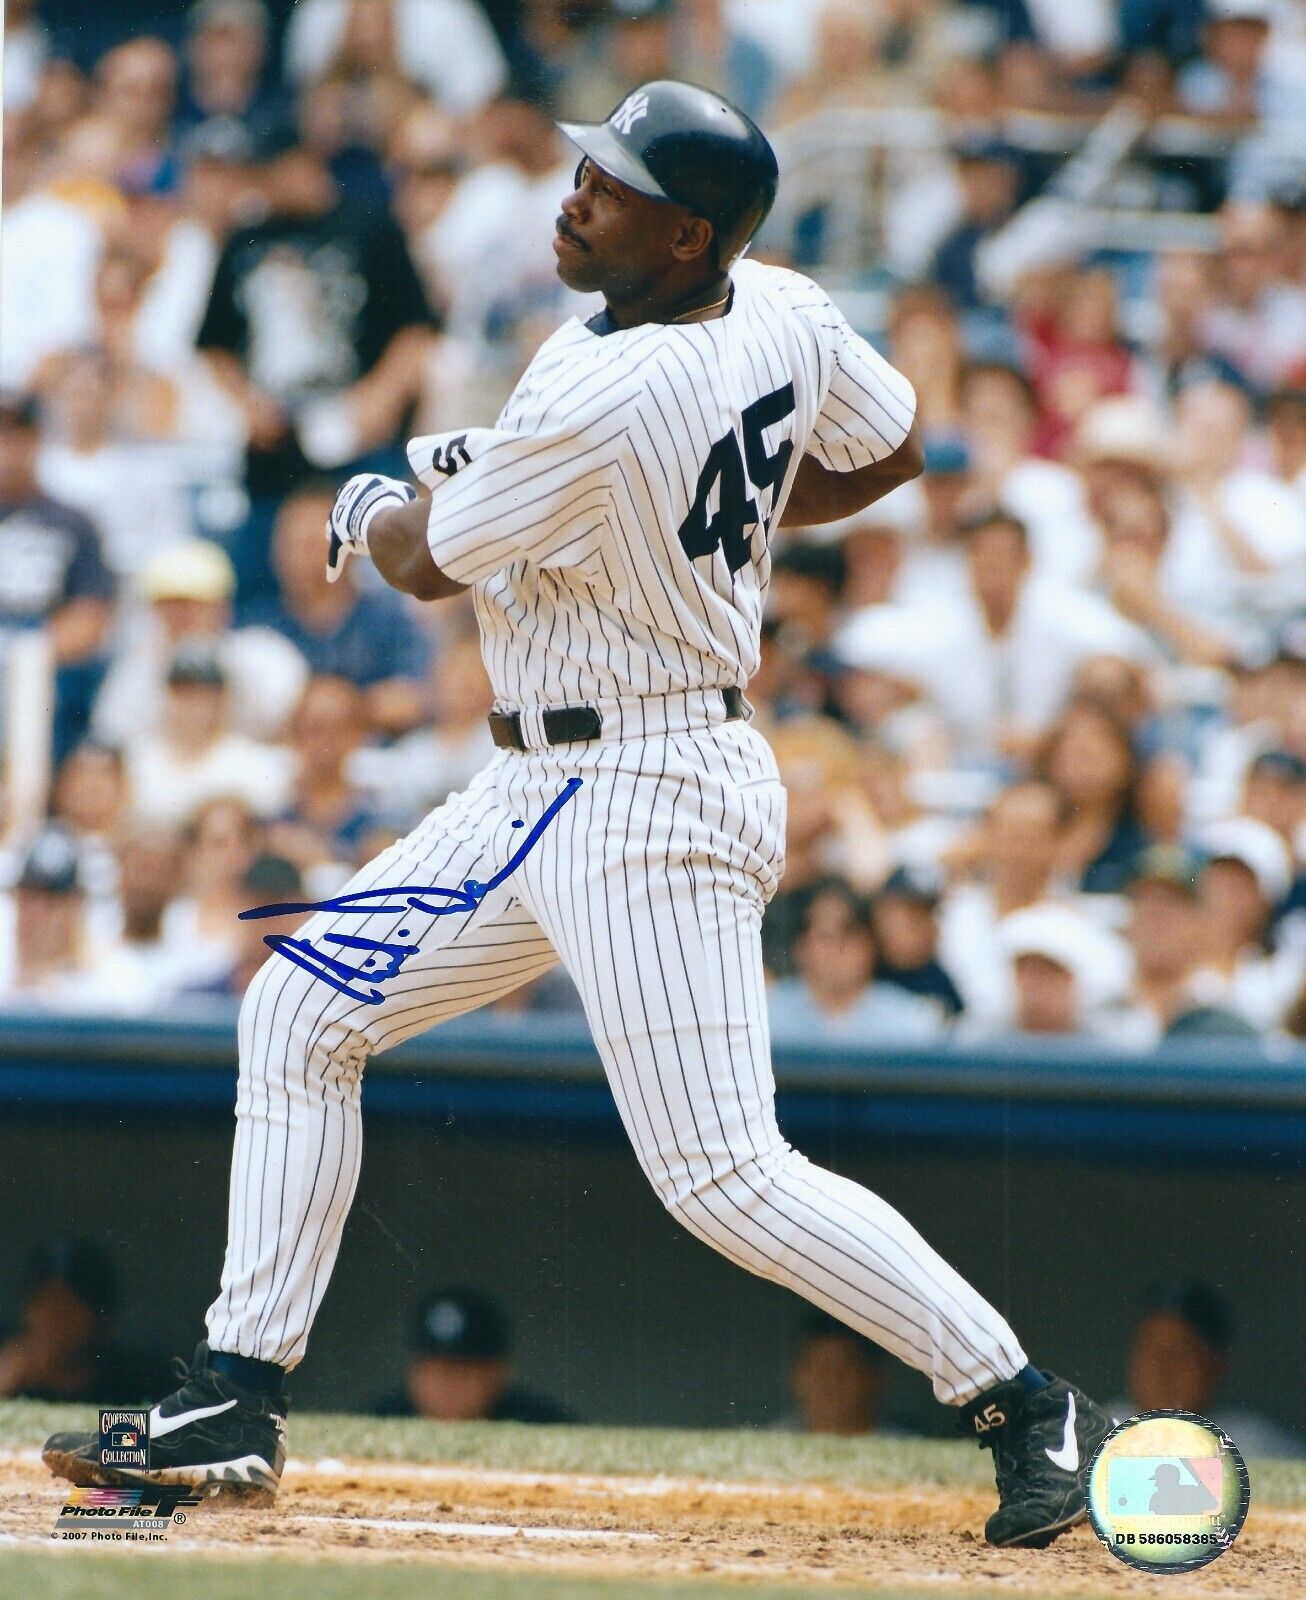 Signed 8x10 CHILI DAVIS New York Yankees Autographed Photo Poster painting - COA